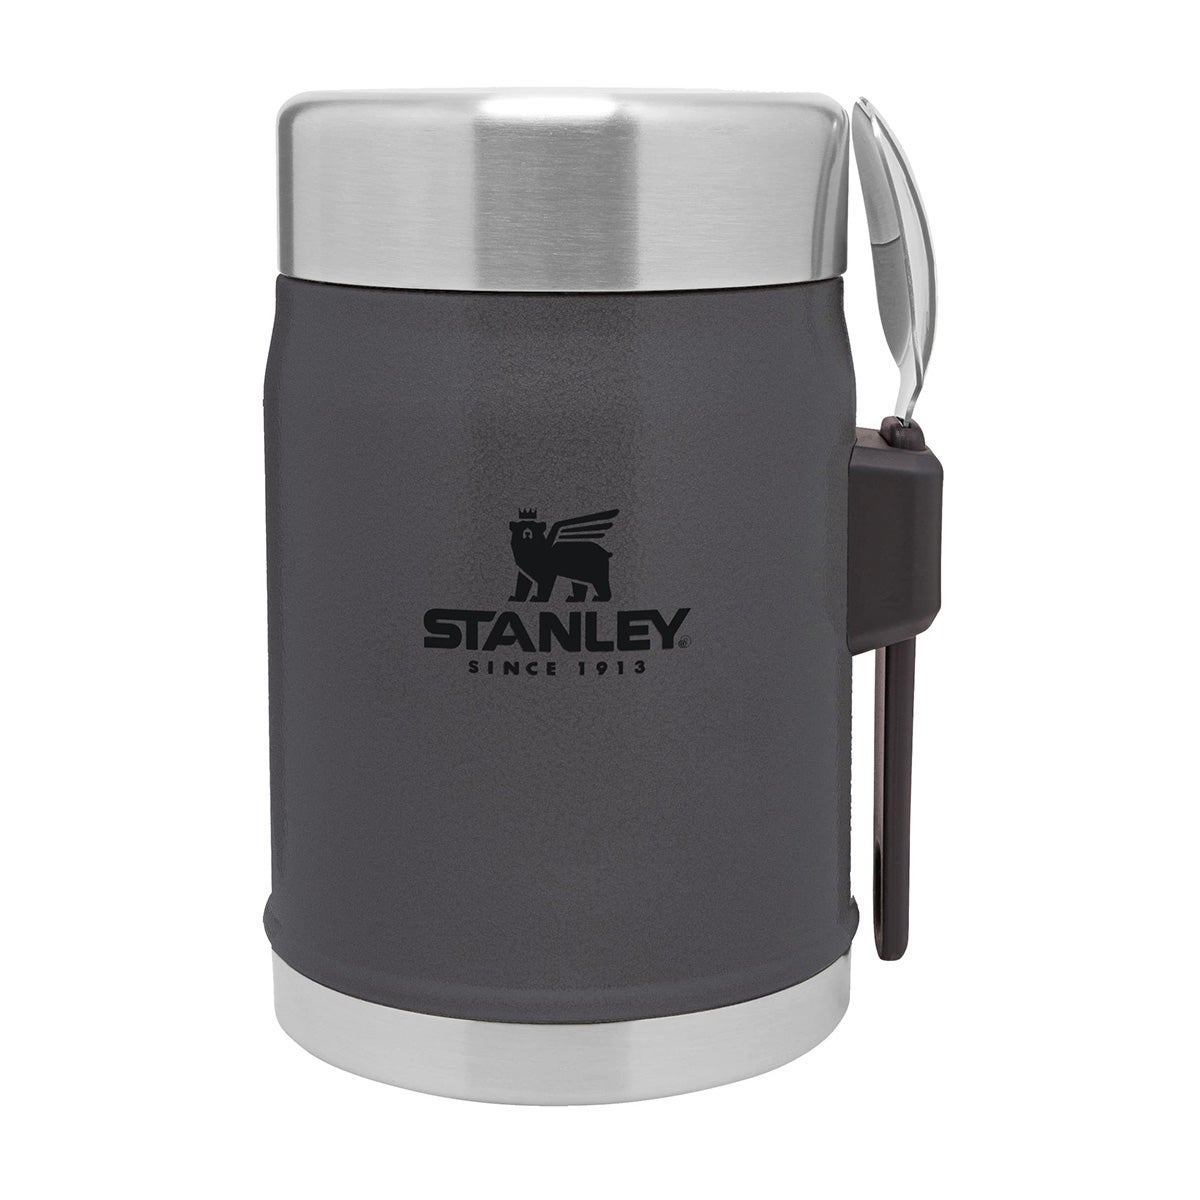 stanley_classic_legendary_ruokatermos_charcoal